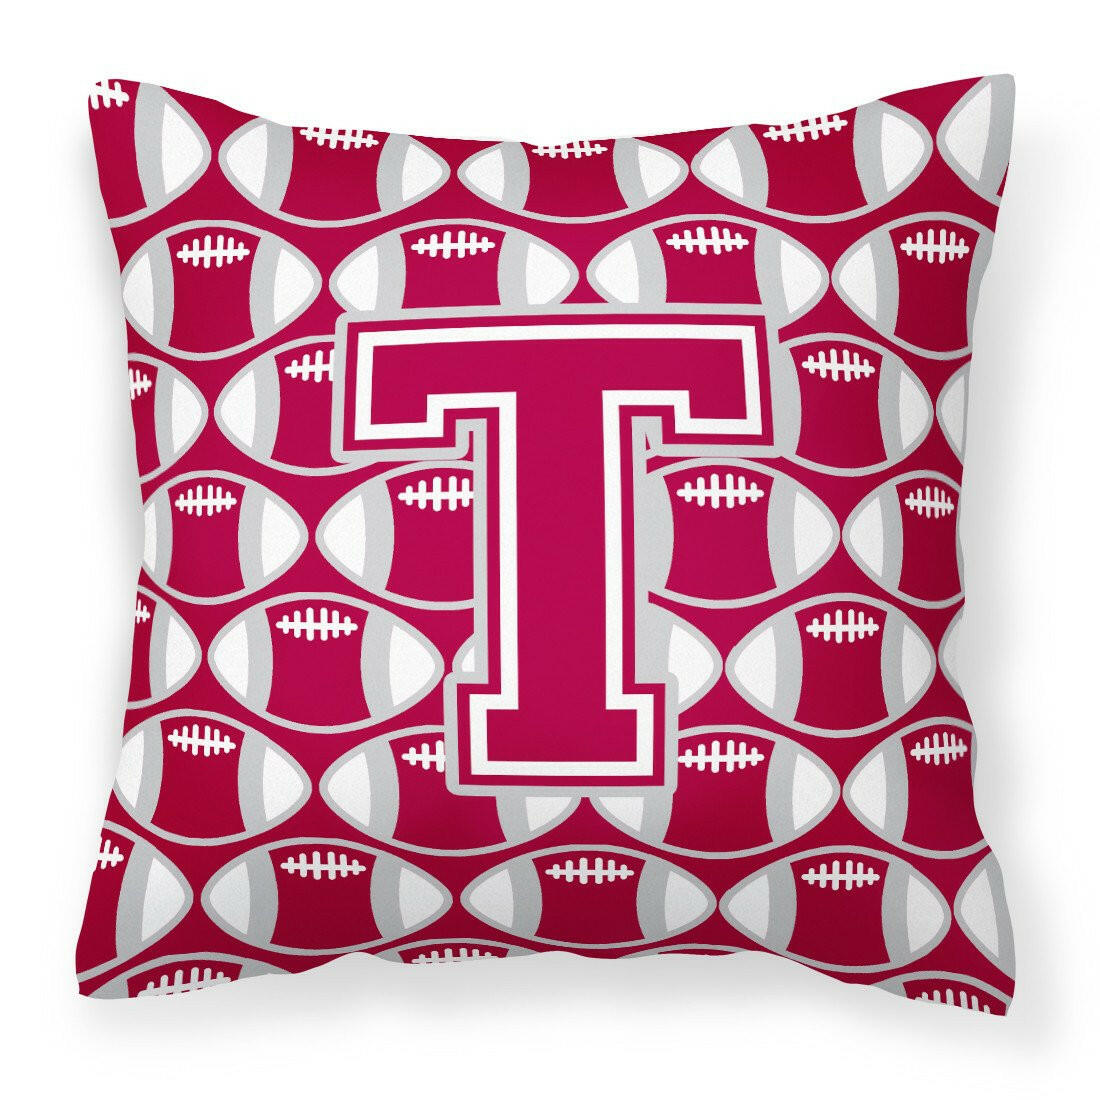 Letter T Football Crimson, grey and white Fabric Decorative Pillow CJ1065-TPW1414 by Caroline's Treasures